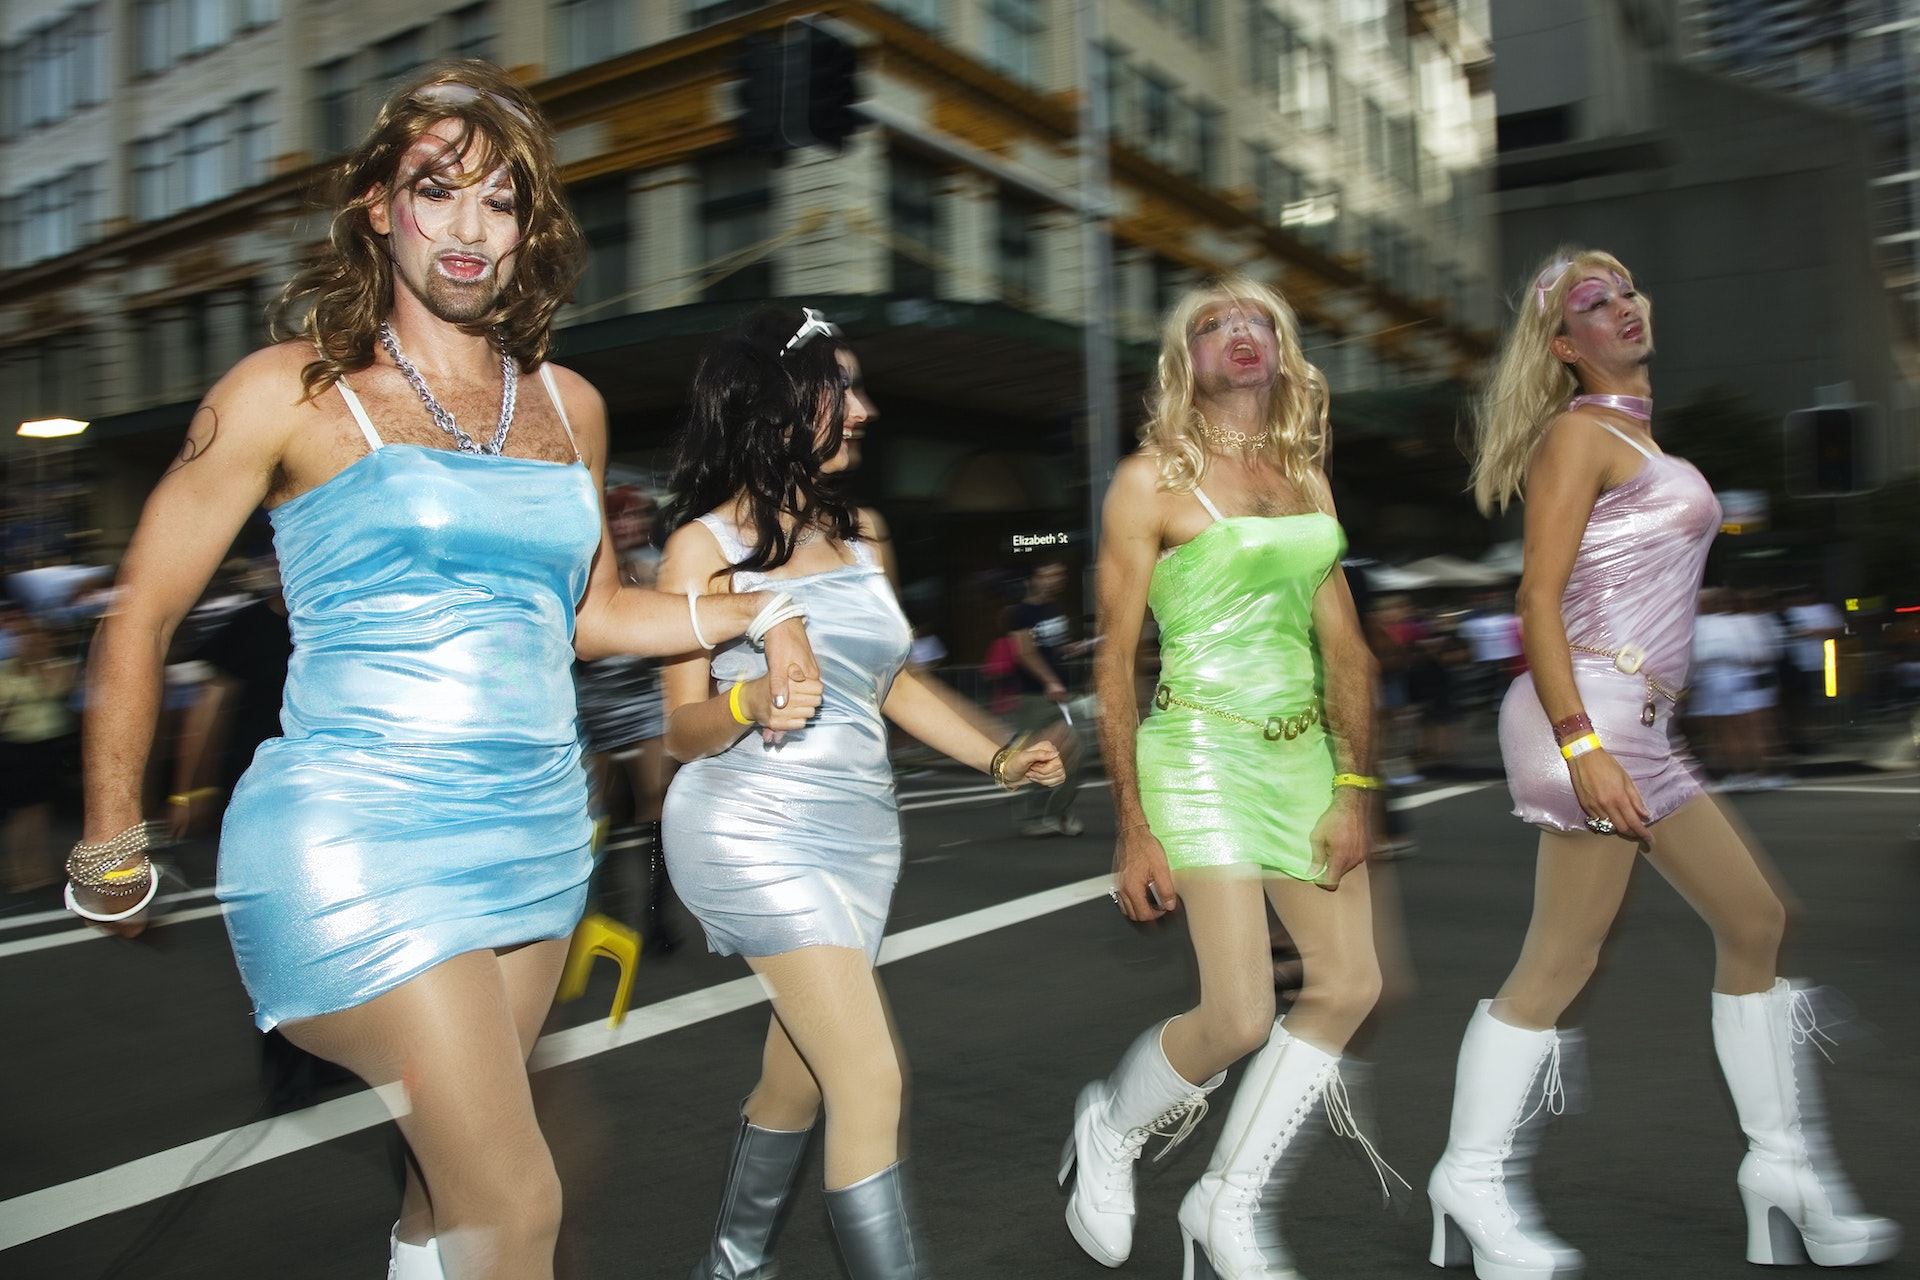 Dressing in drag is all part of the spectacle at Sydney's Mardi Gras Parade